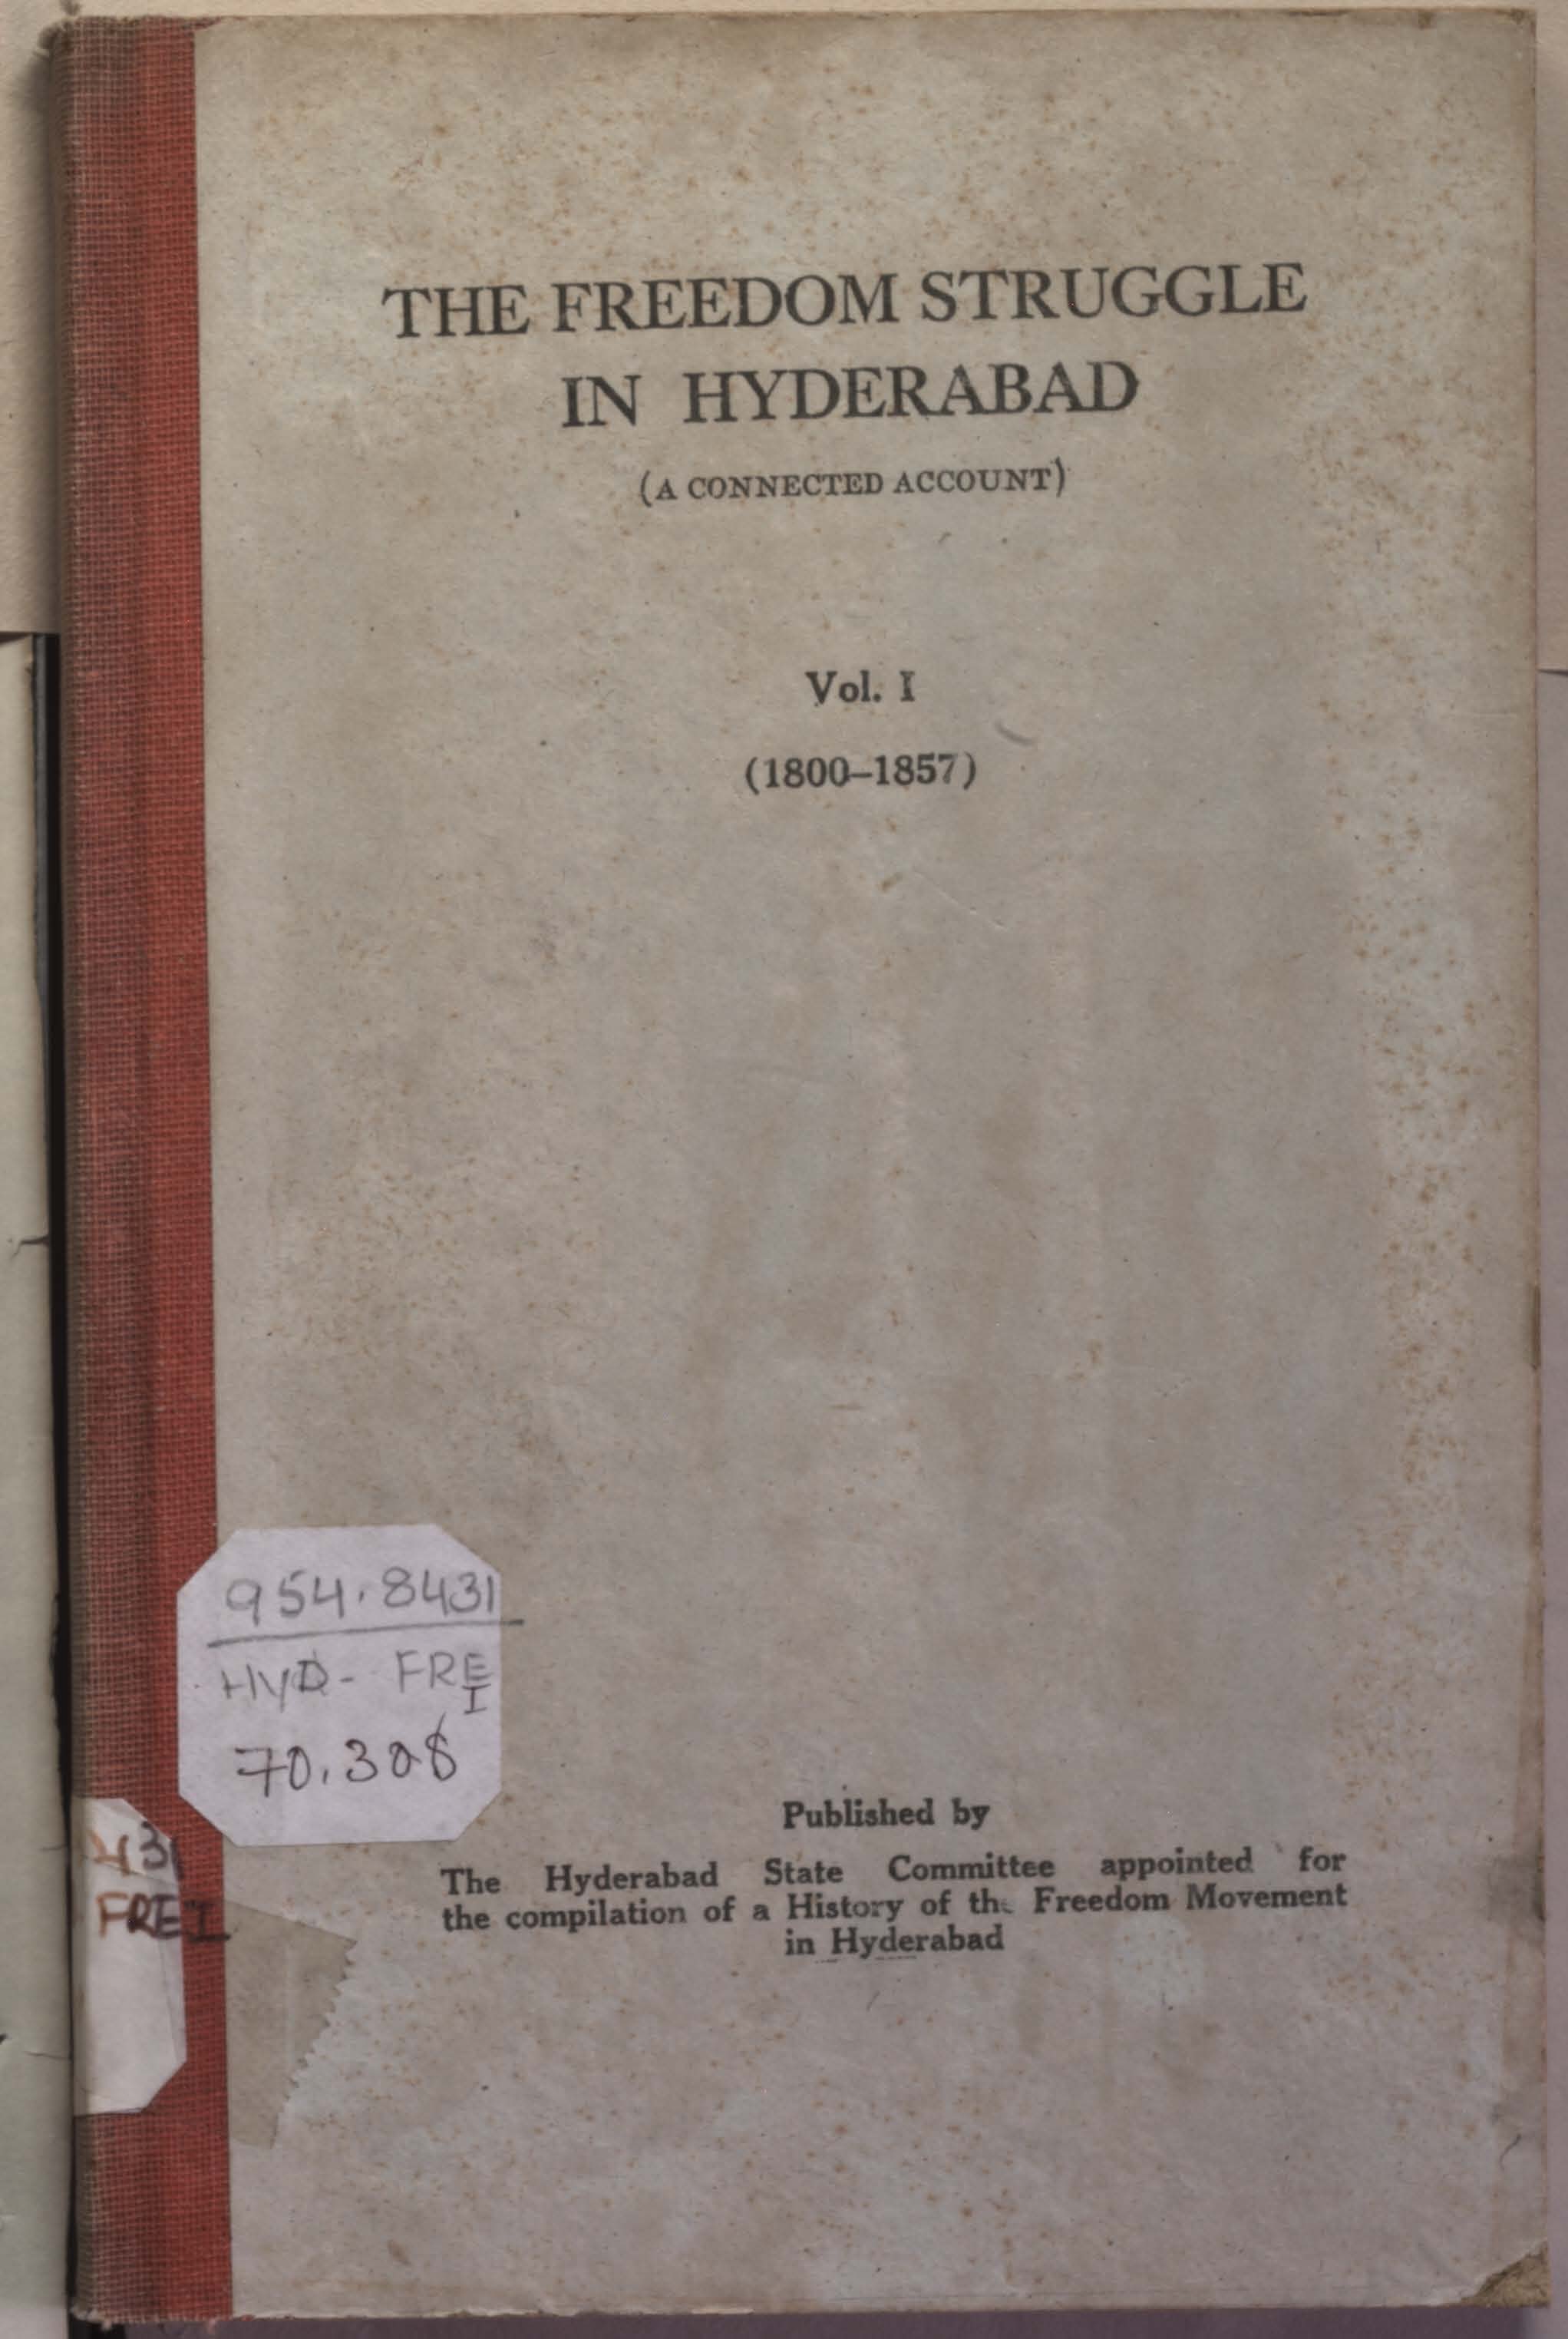 The Freedom Struggle in Hyderabad Vol - 1 (1800-1857)